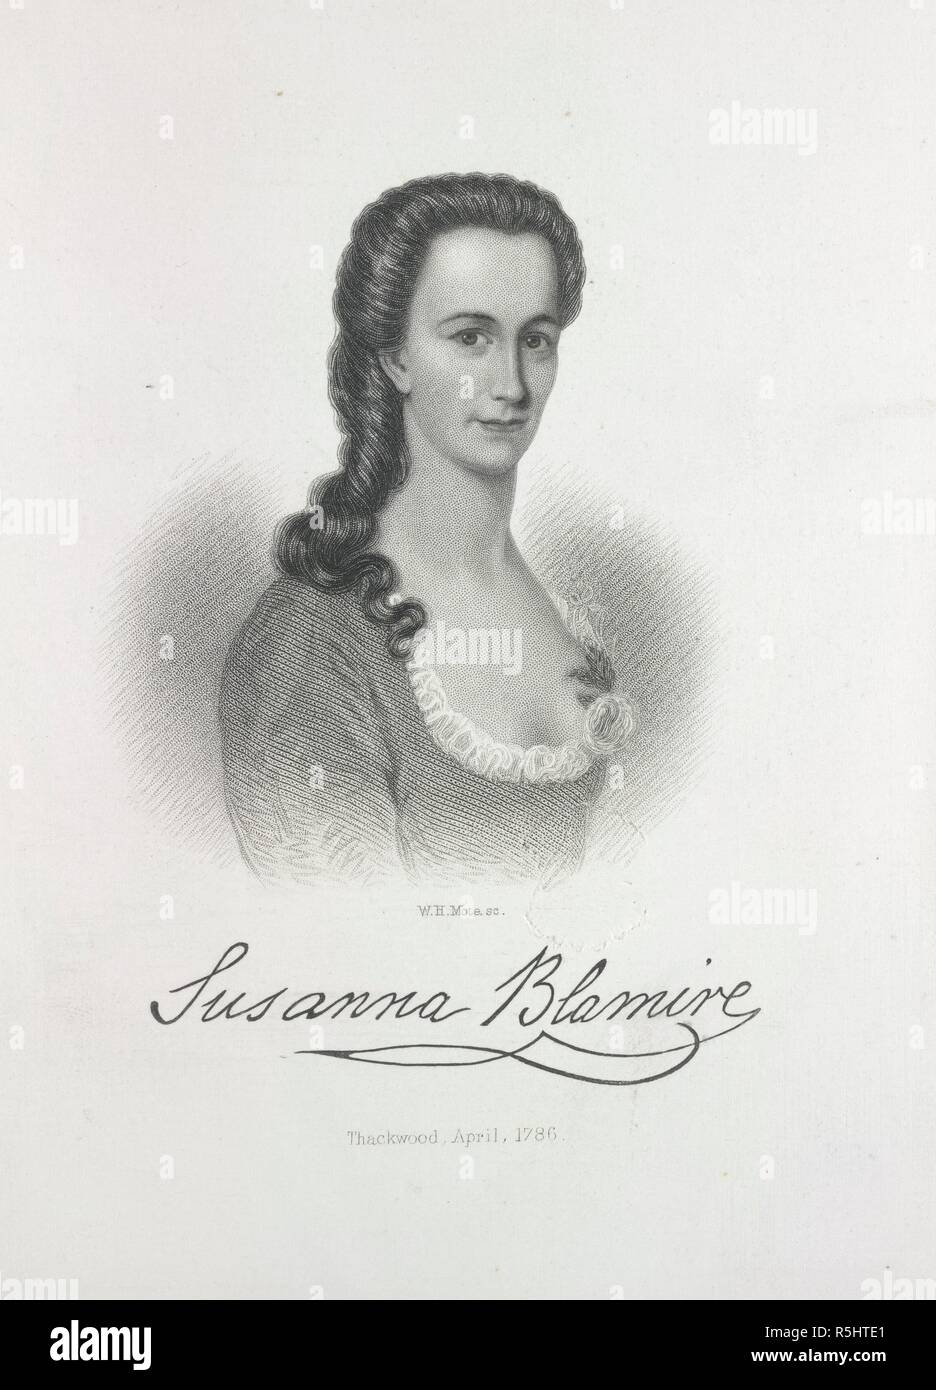 Susanna Blamire. [A collection of engraved and lithographed Portrai. [1610?-1860?]. Susanna Blamire (1747-1794). Poetess. Portrait.  Image taken from [A collection of engraved and lithographed Portraits of English poetesses; made by F. J. Stainforth, together with a few autograph letters, etc.].  Originally published/produced in [1610?-1860?]. . Source: 1876.f.22, 14. Language: English. Author: MOTE, W. H. Stock Photo